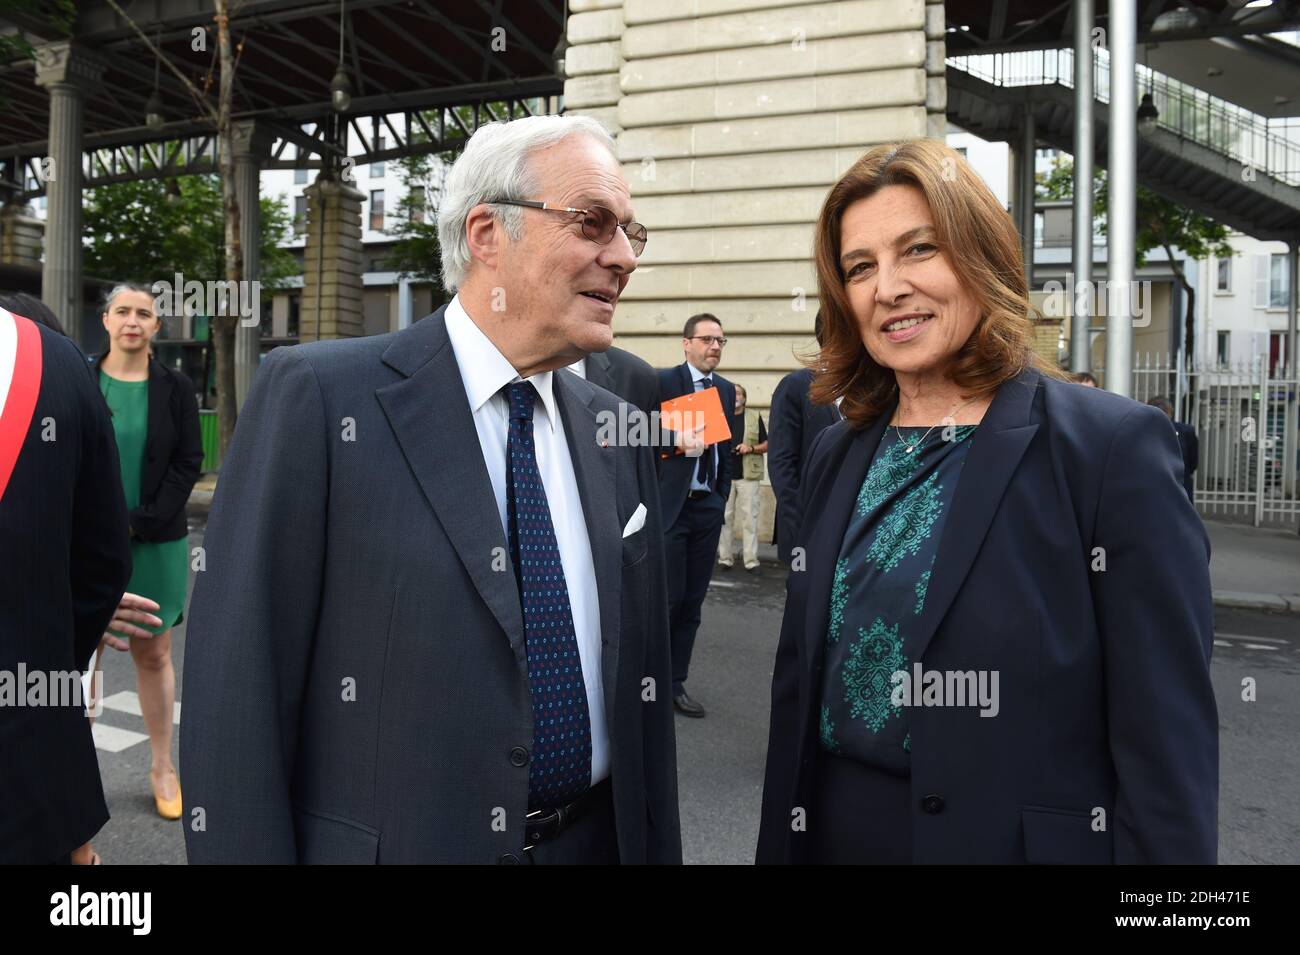 Eric de Rothschild and Aliza Bin Noun attending a ceremony commemorating the 75th anniversary of the Vel d'Hiv roundup in Paris, France on July 16, 2017. French President Emmanuel Macron marked 75 years since the roundup of some 13,000 Jews to be sent to Nazi death camps. Photo by Erez Lichtfeld/Pool/ABACAPRESS.COM Stock Photo